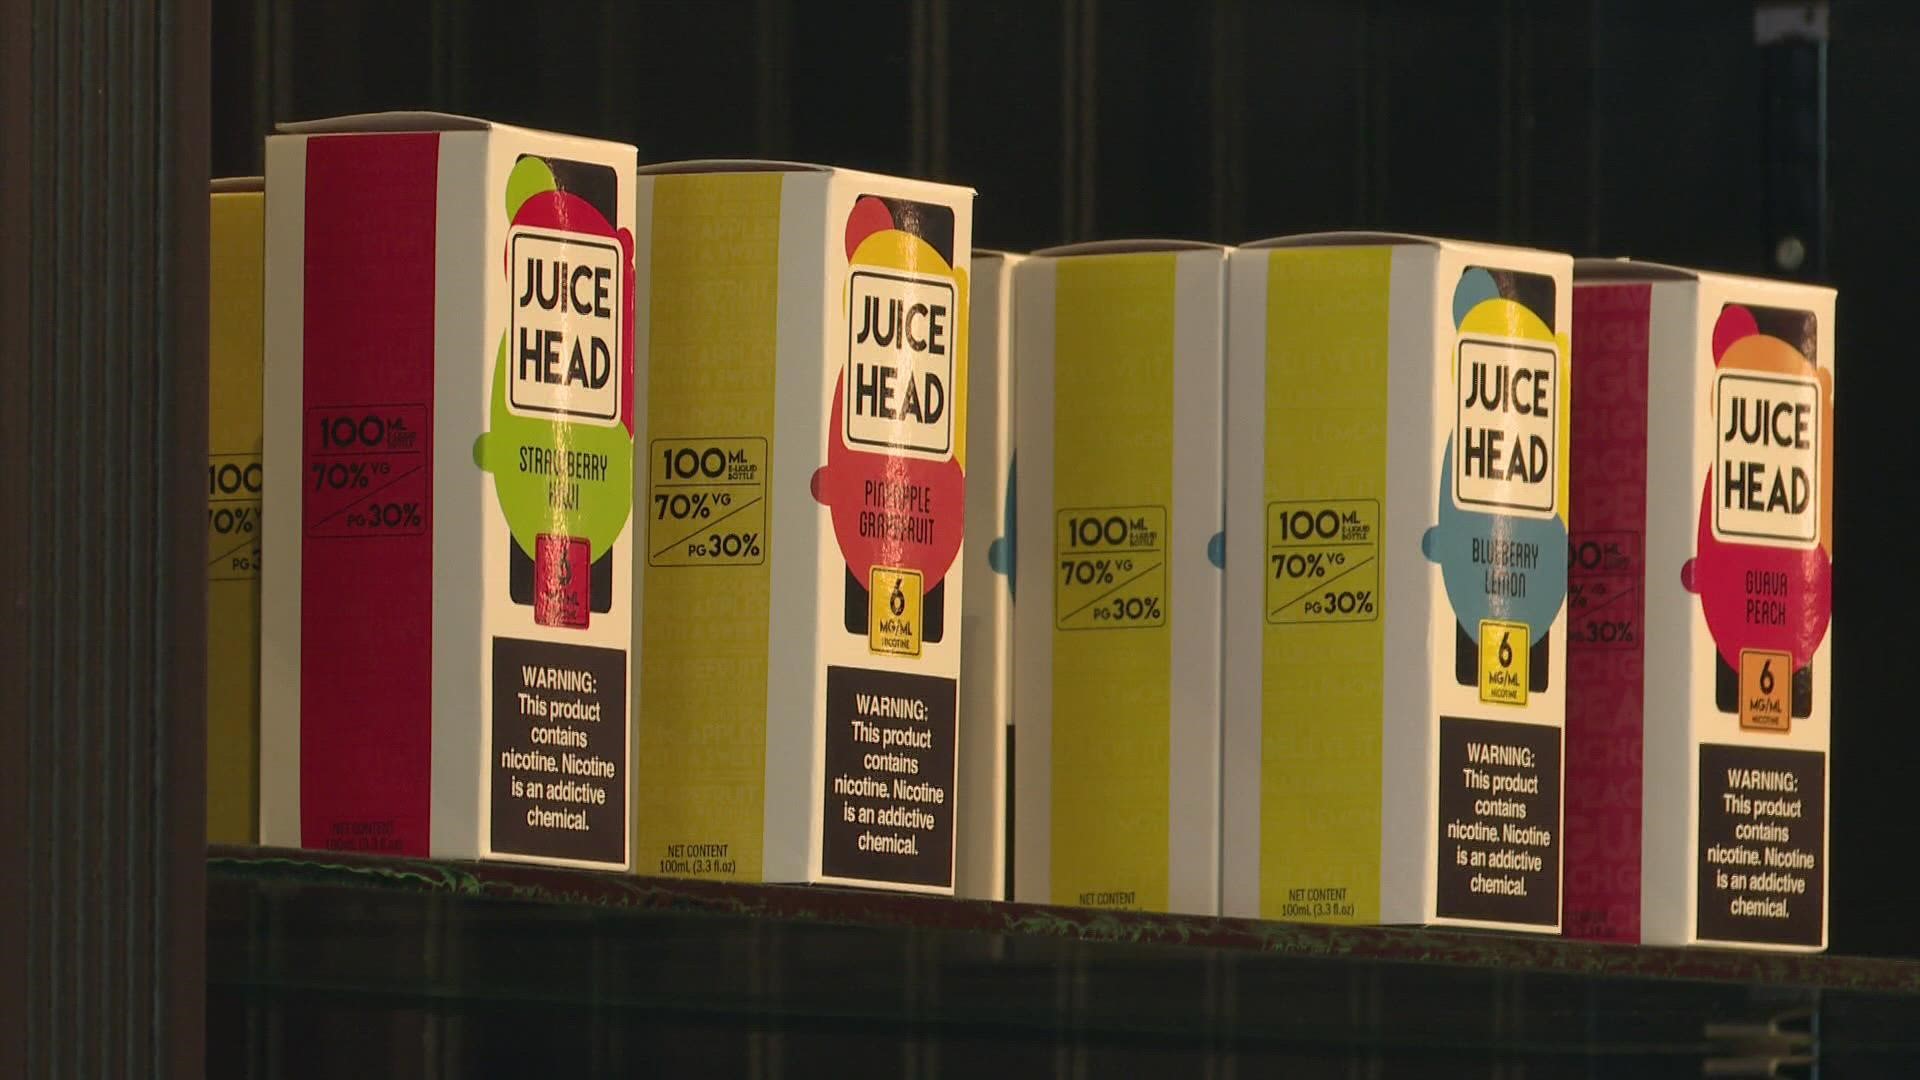 City councilors voted 6 to 1 Monday night to ban the sale of flavored tobacco products.